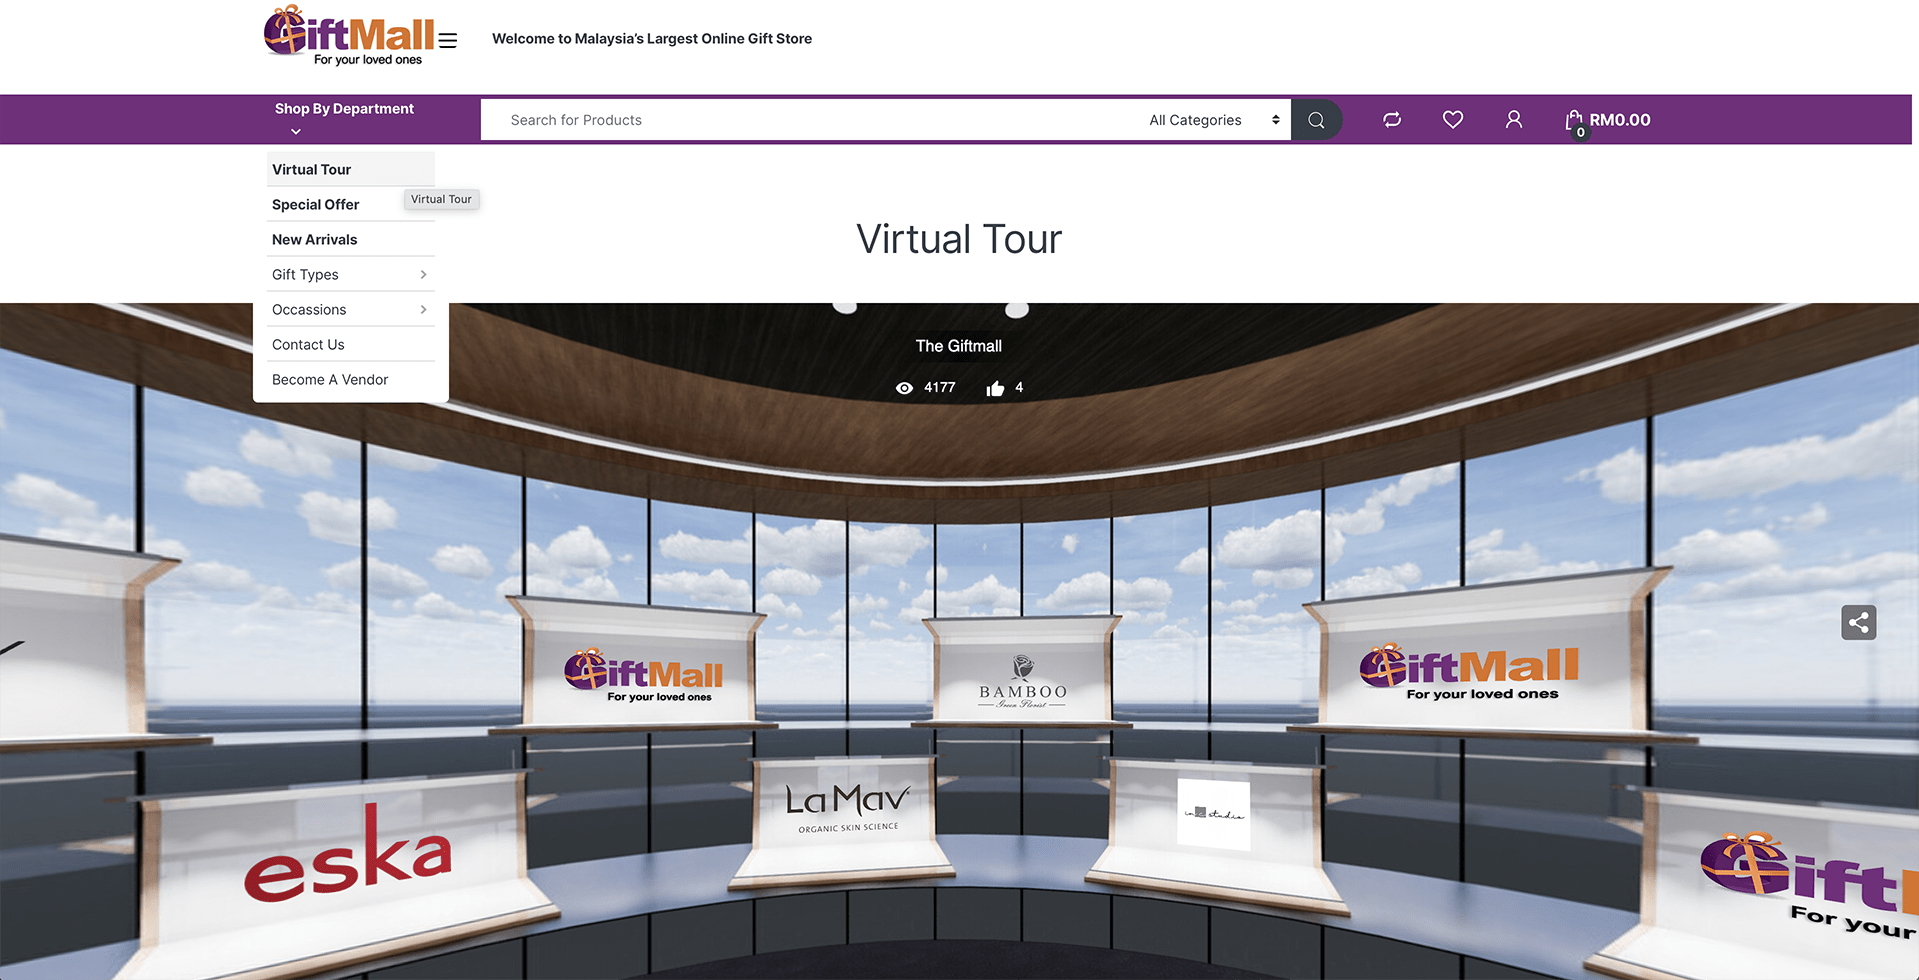 The virtual mall is embedded on Giftmall’s online marketplace to engage visitors and allow all the merchants to present their gift suggestions.